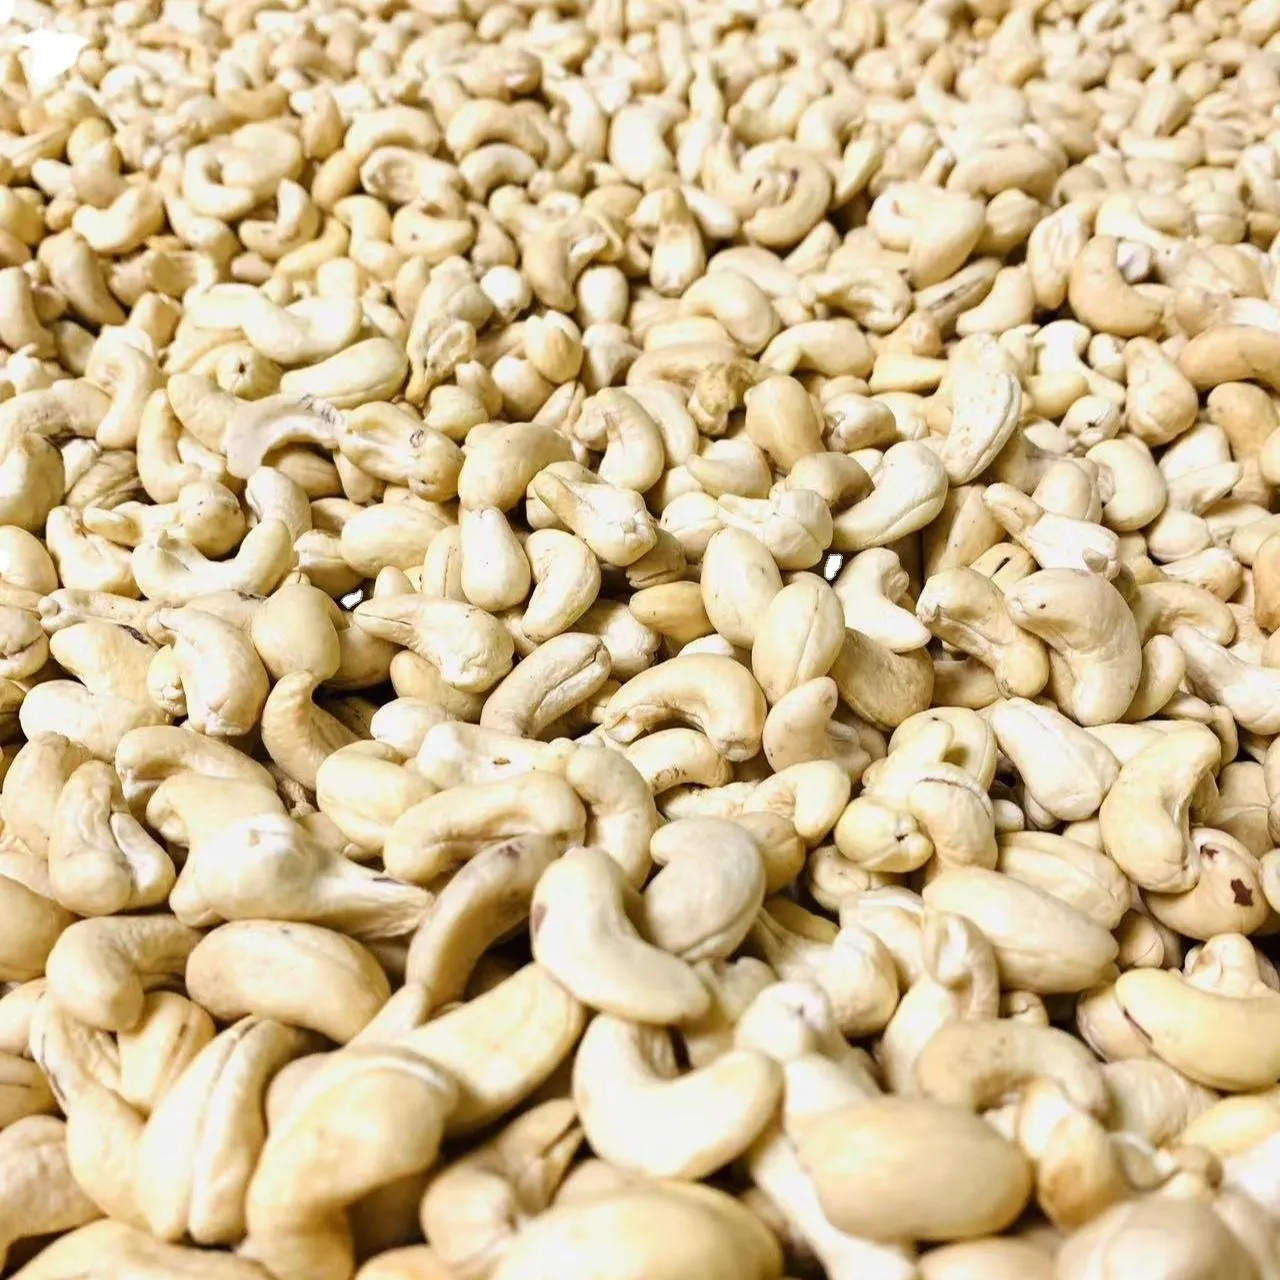 Price and buy raw cashew nuts Singapore + cheap sale